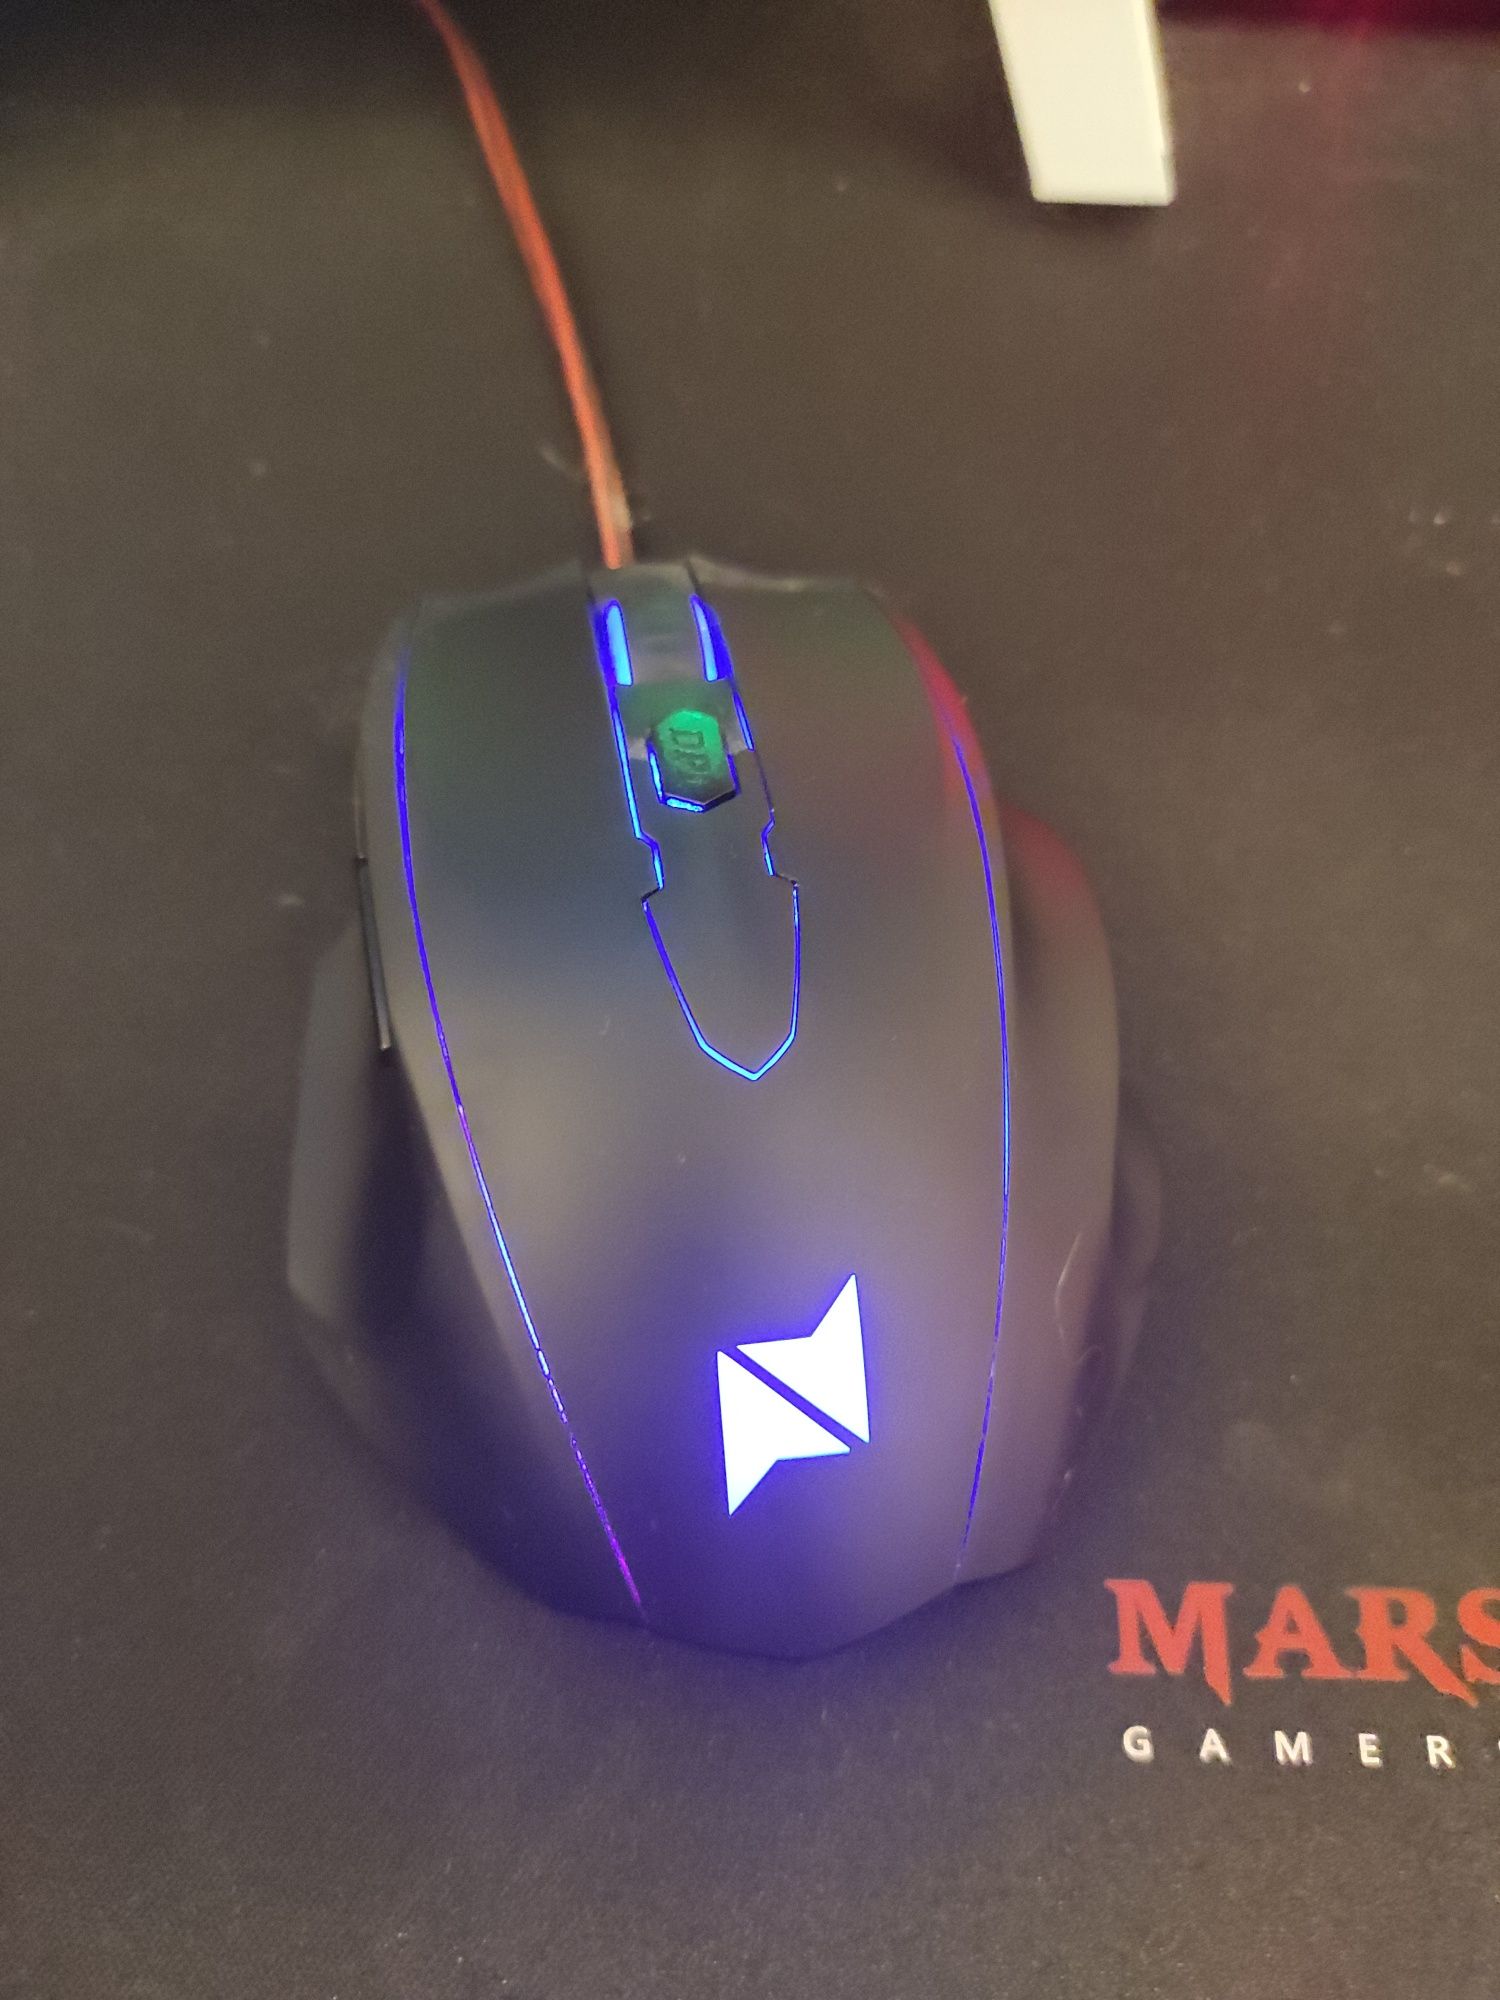 Gaming mouse aim2.0